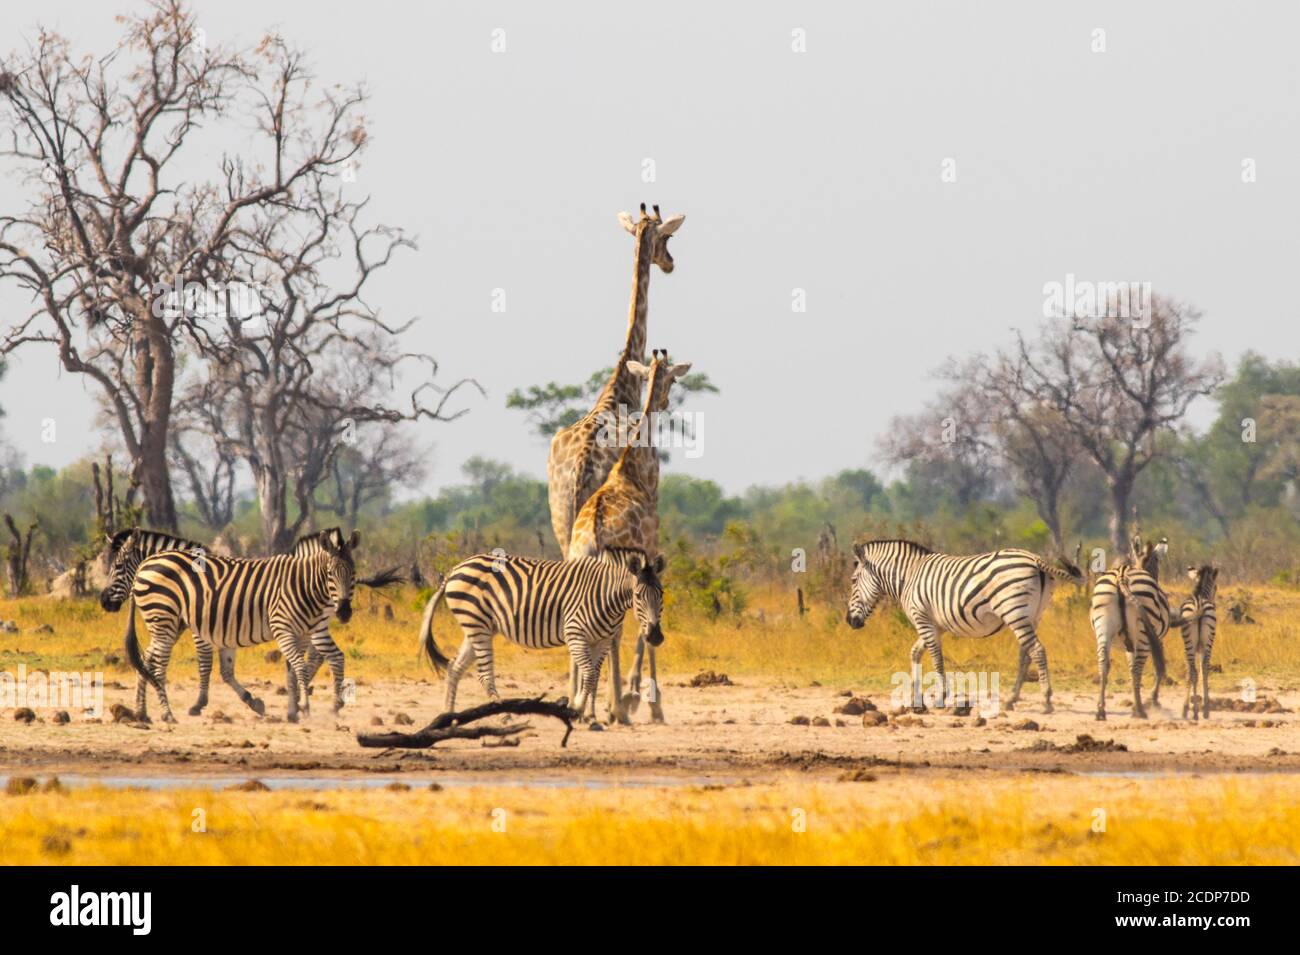 A Dazzle of zzebra and a lone giraffe at a waterhole in Hwange national park zimbabwe -  heat haze and dust is visible Stock Photo